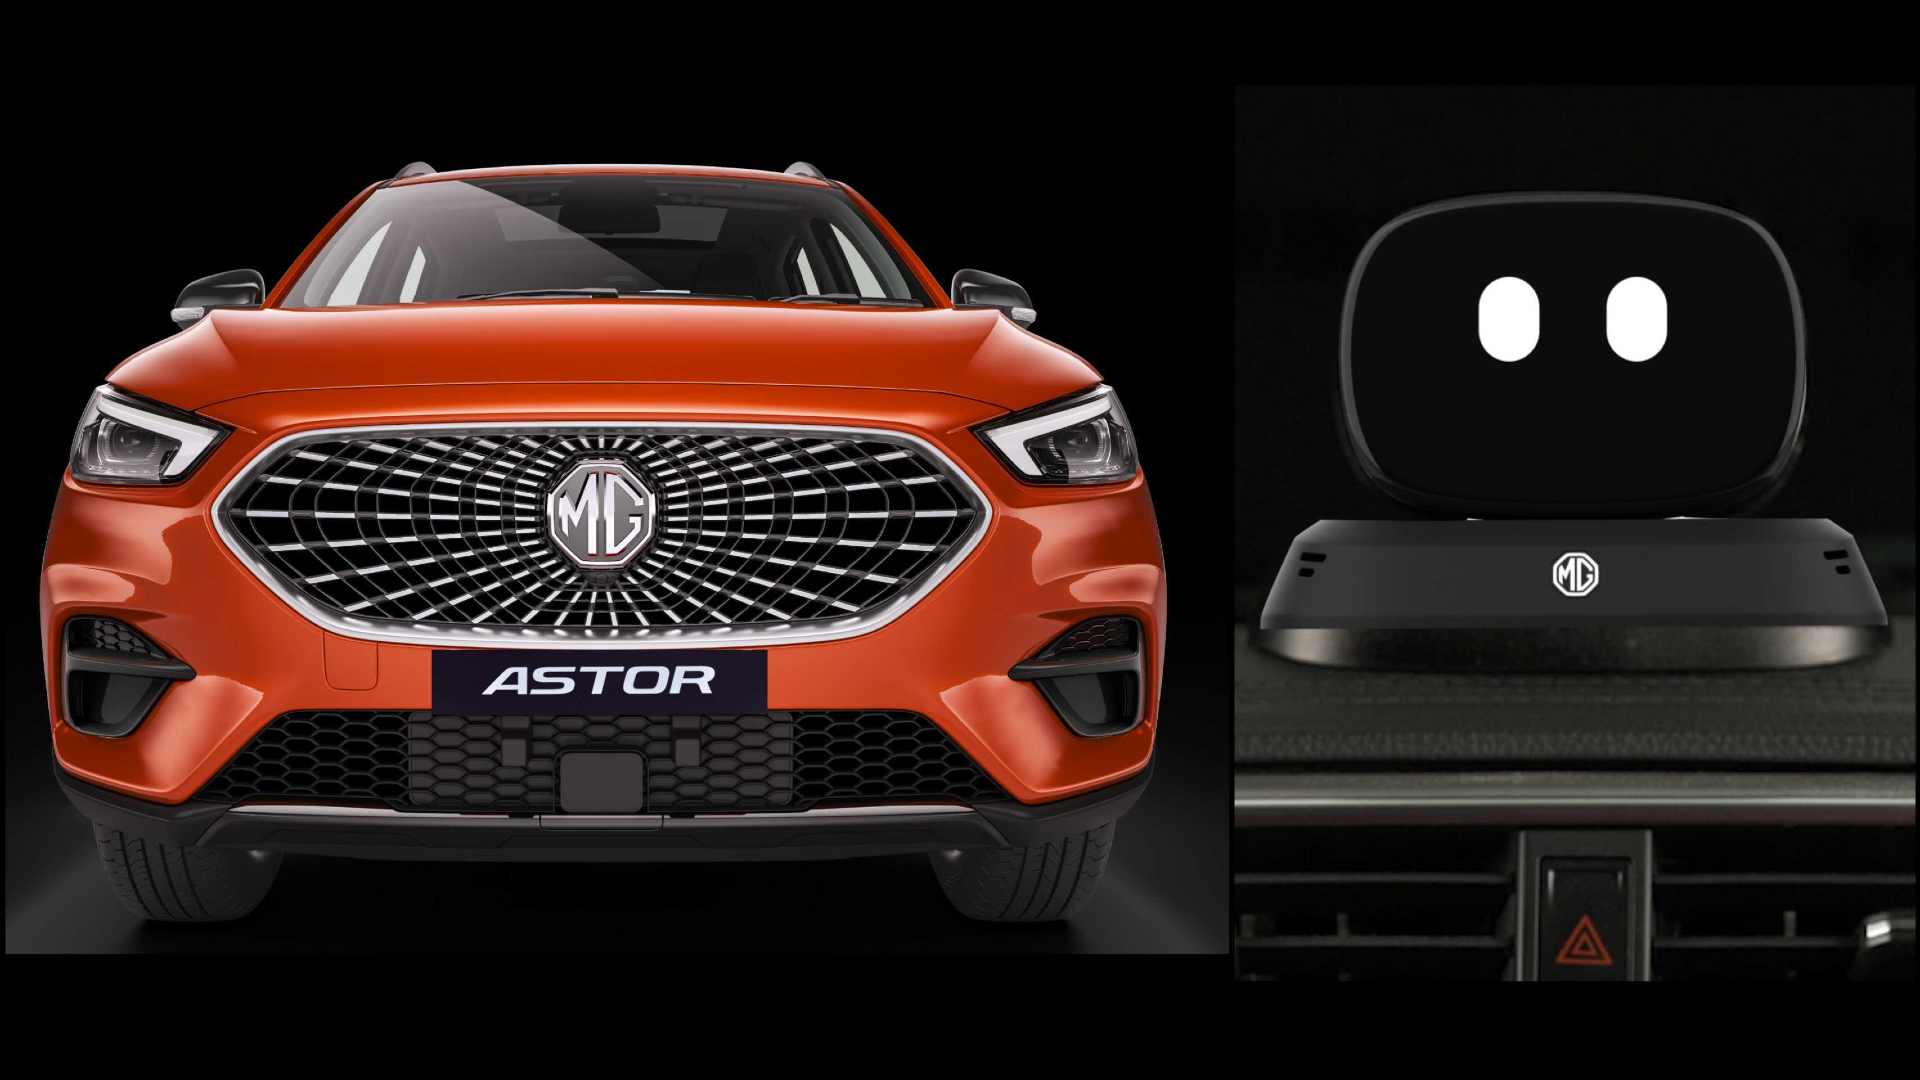 The MG Astor is the first SUV in India to feature an actual AI-powered robot inside the vehicle. Image: MG Motor India